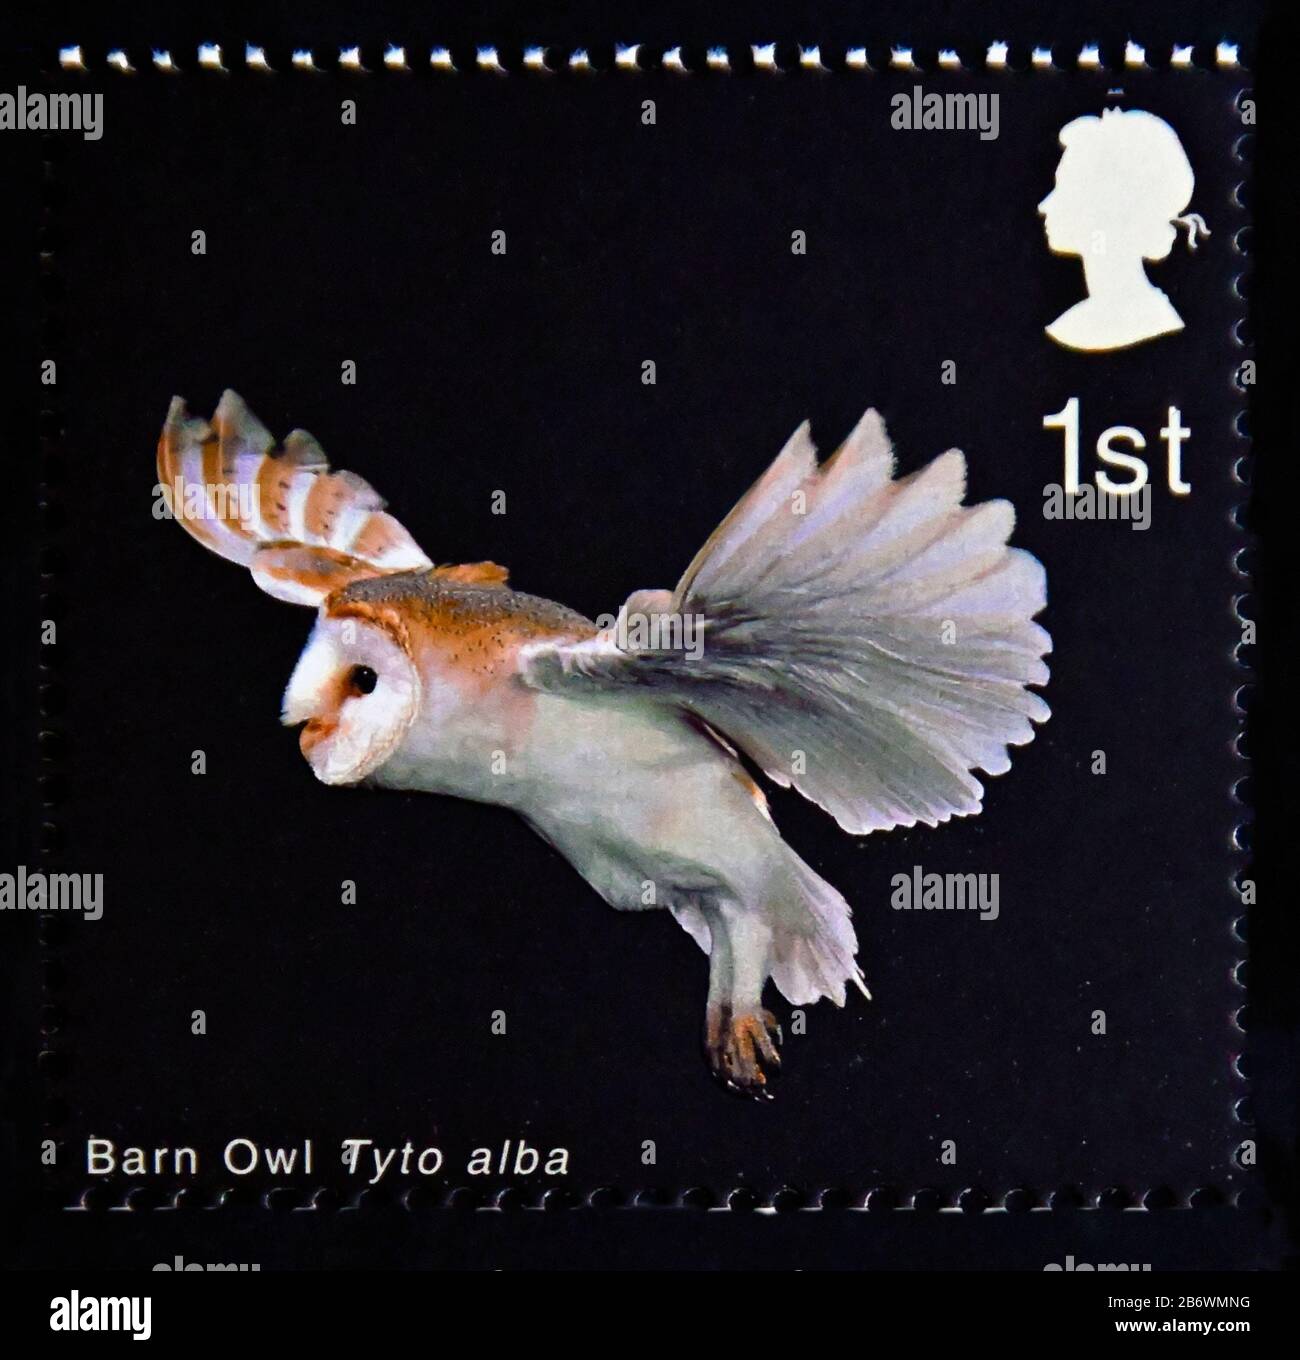 Postage stamp. Great Britain. Queen Elizabeth II. Birds of Prey. Barn Owl. Barn Owl with extended Wings and Legs down . 1st. 2003. Stock Photo